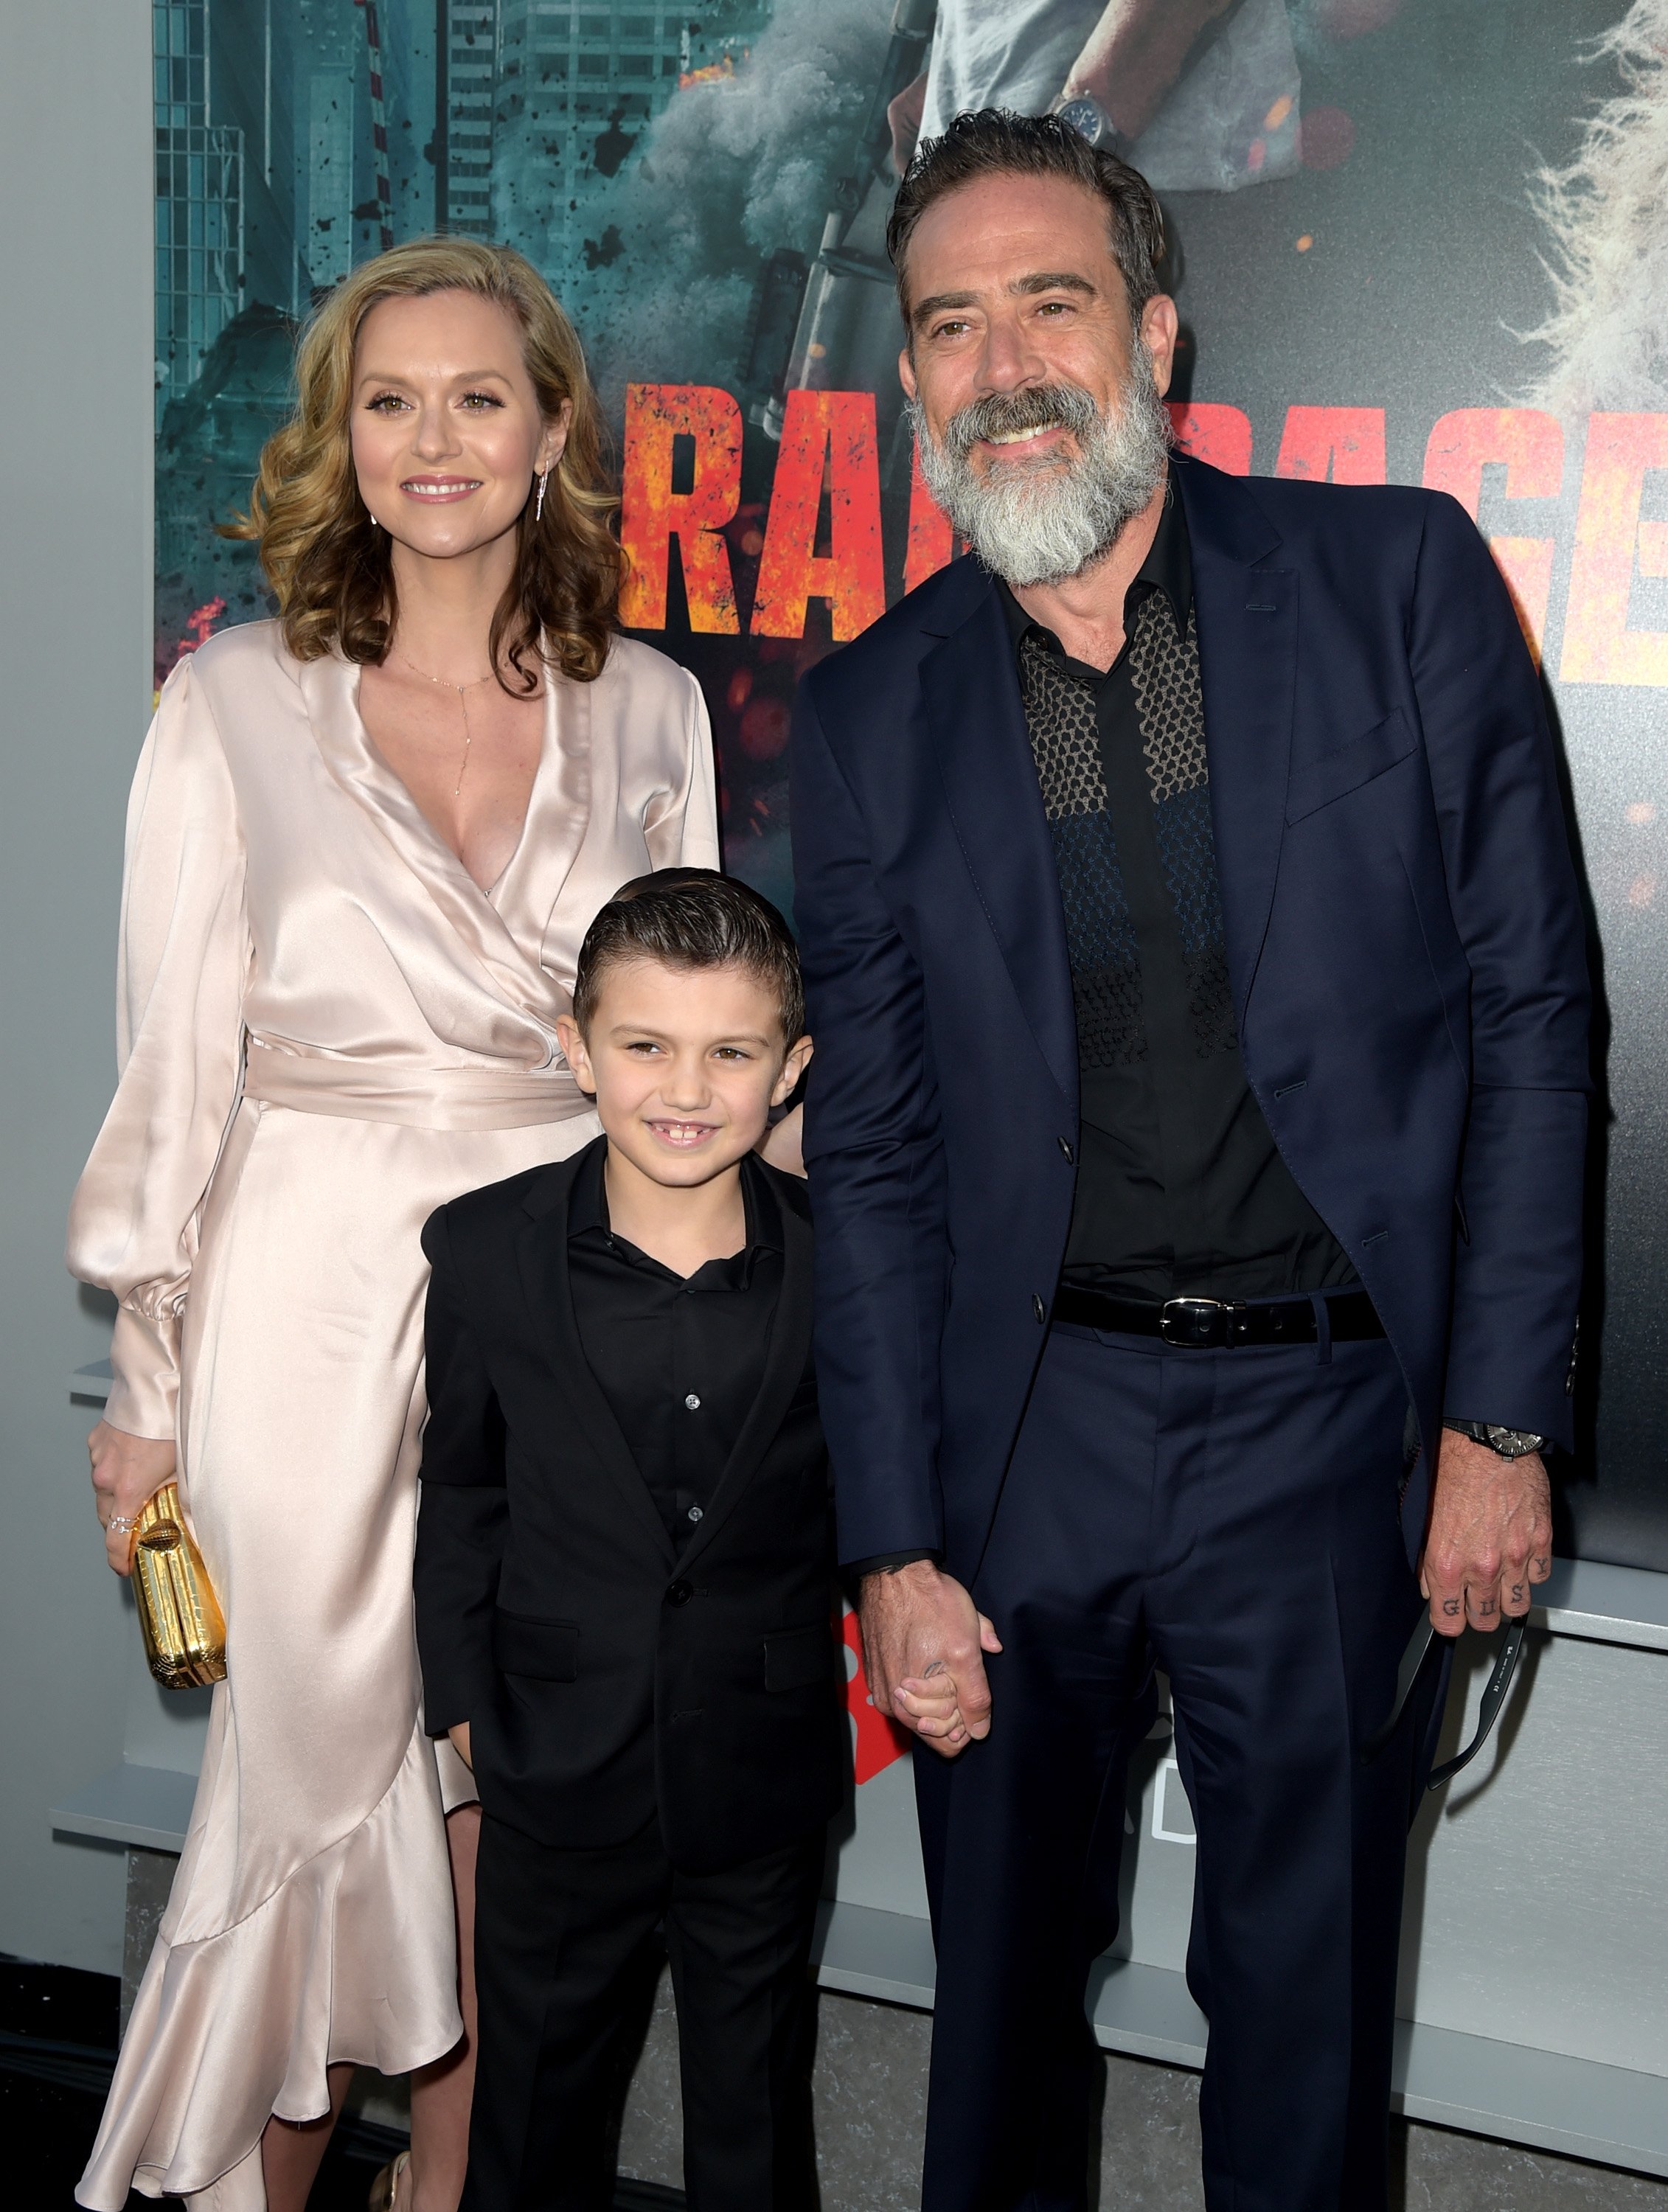 Actor Jeffrey Dean Morgan, Hilarie Burton and their son Augustus Morgan attend the premiere of Warner Bros. Pictures' "Rampage" on April 4, 2018 in Los Angeles, California. | Source: Getty Images